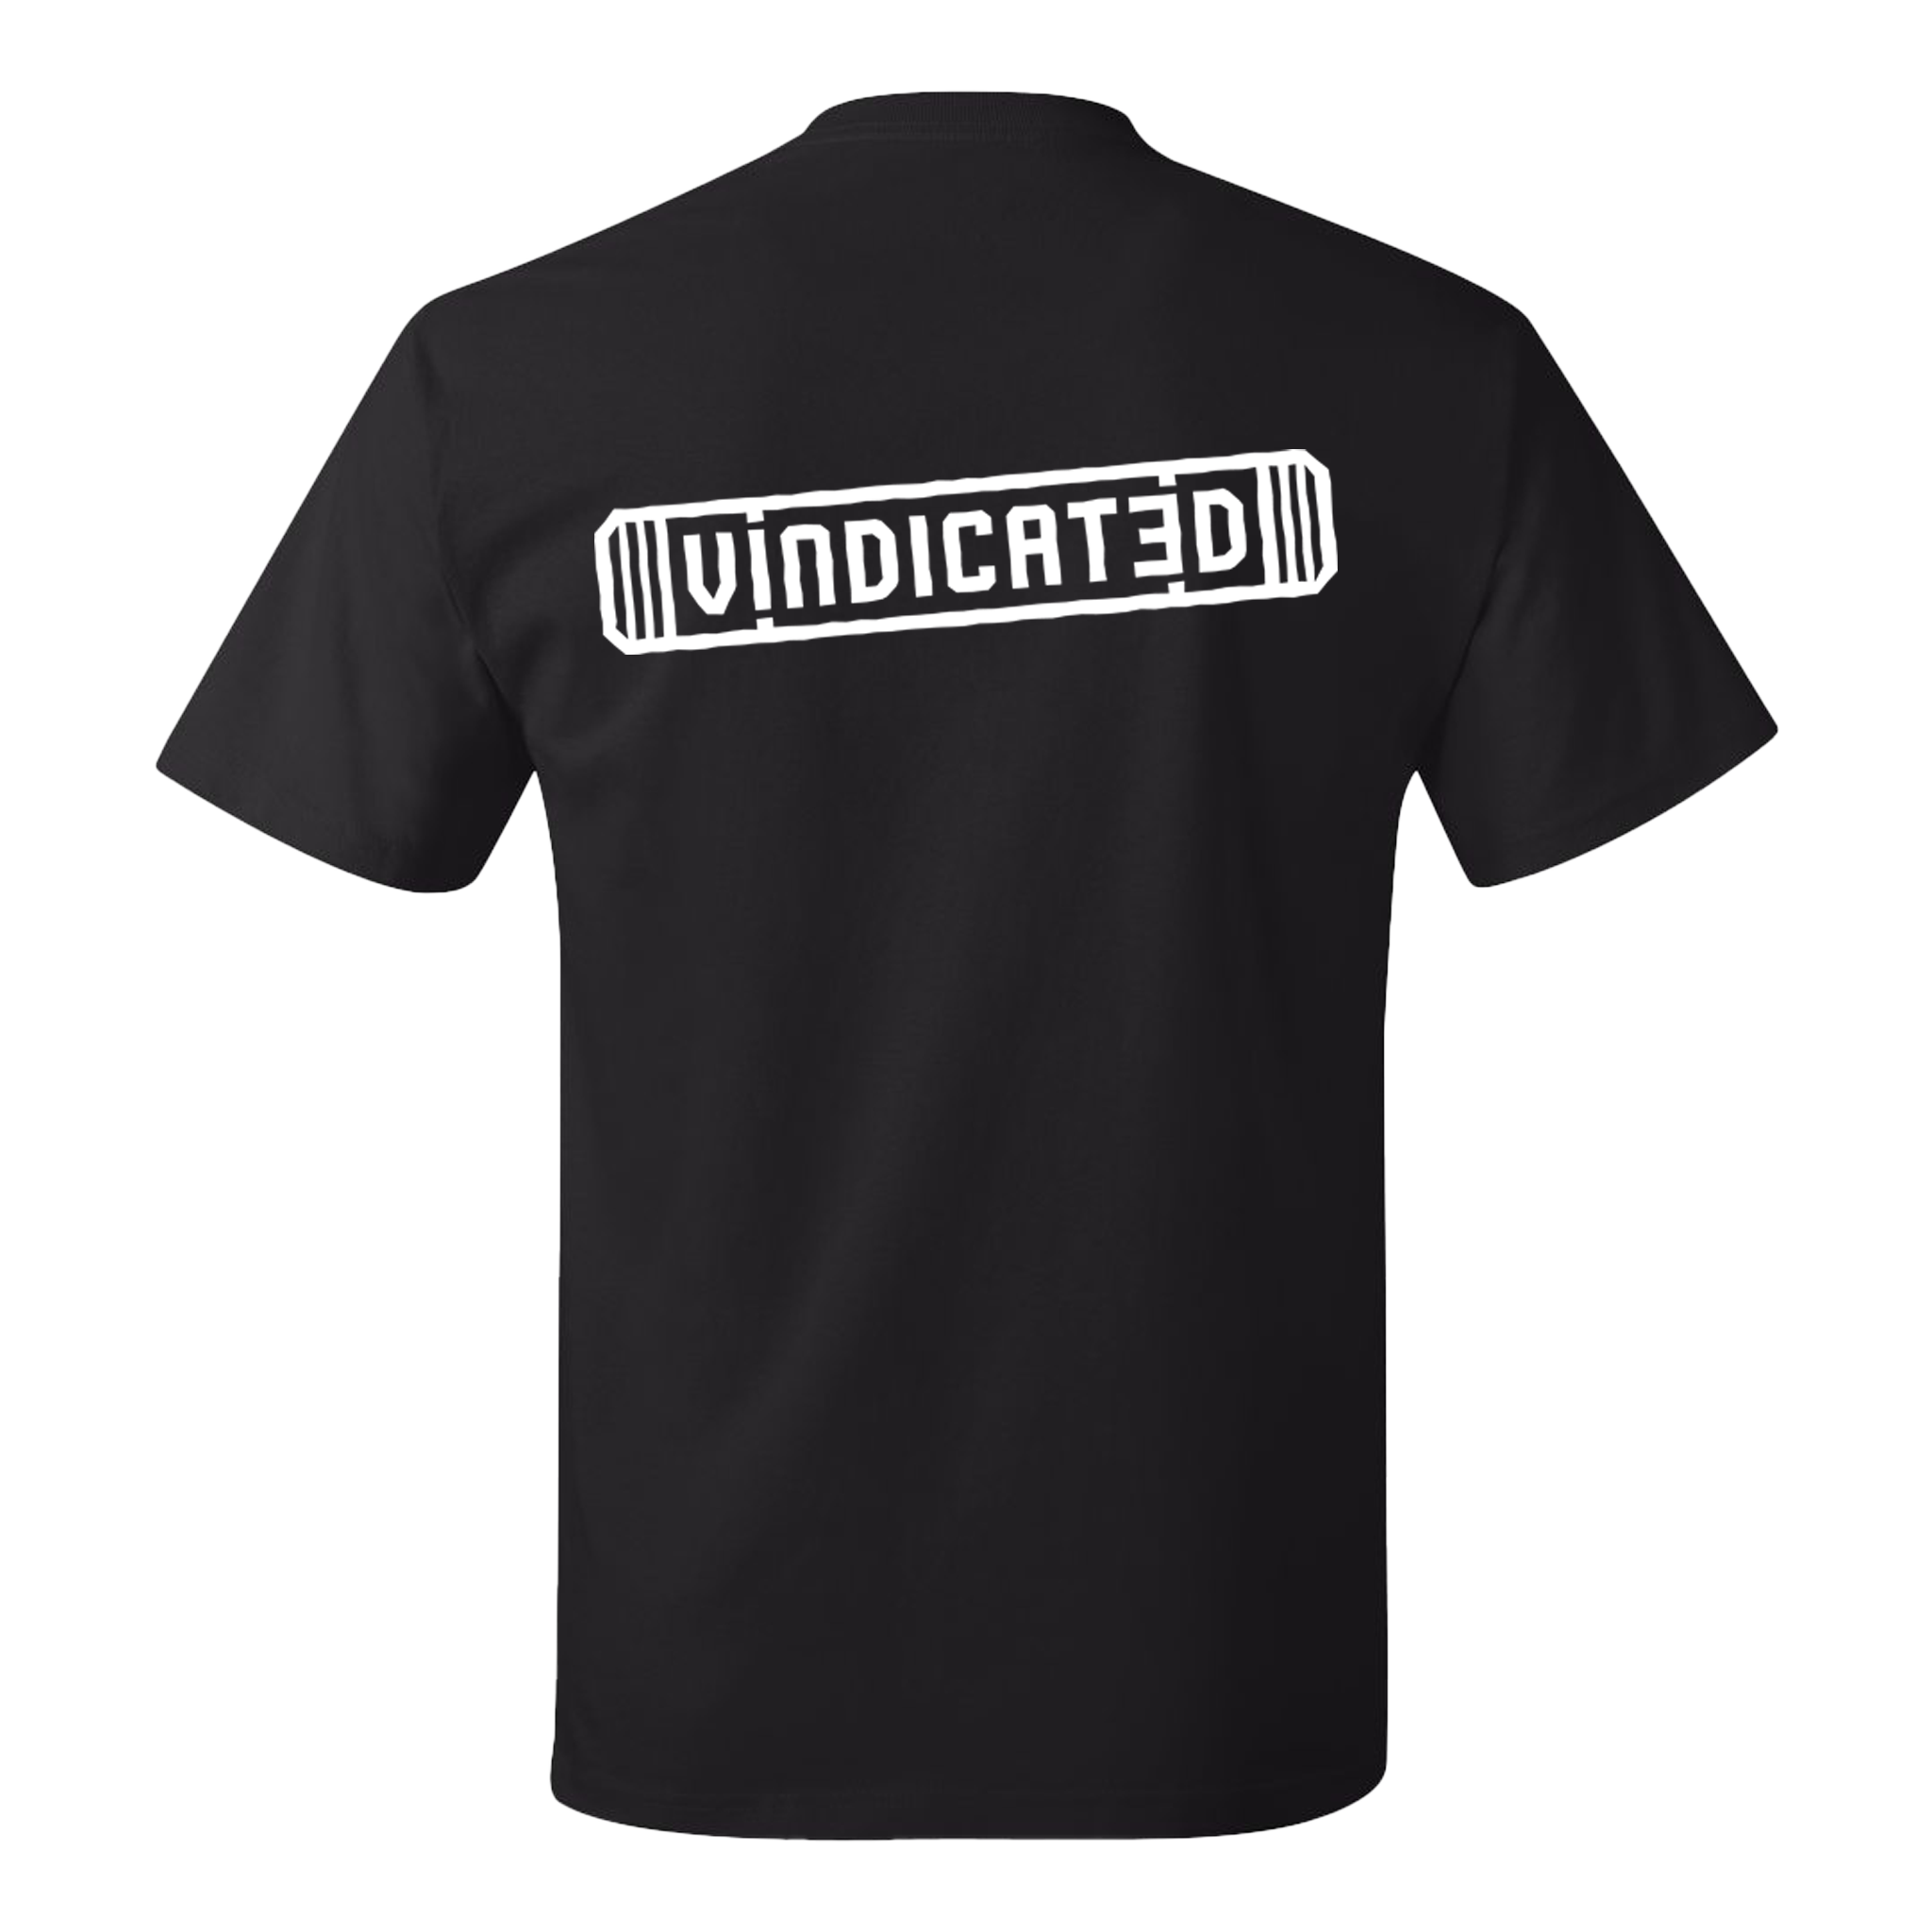 Backside of the Black Vindicated tee shirt with "Vindicated" in white across the middle of the back inside a skateboard